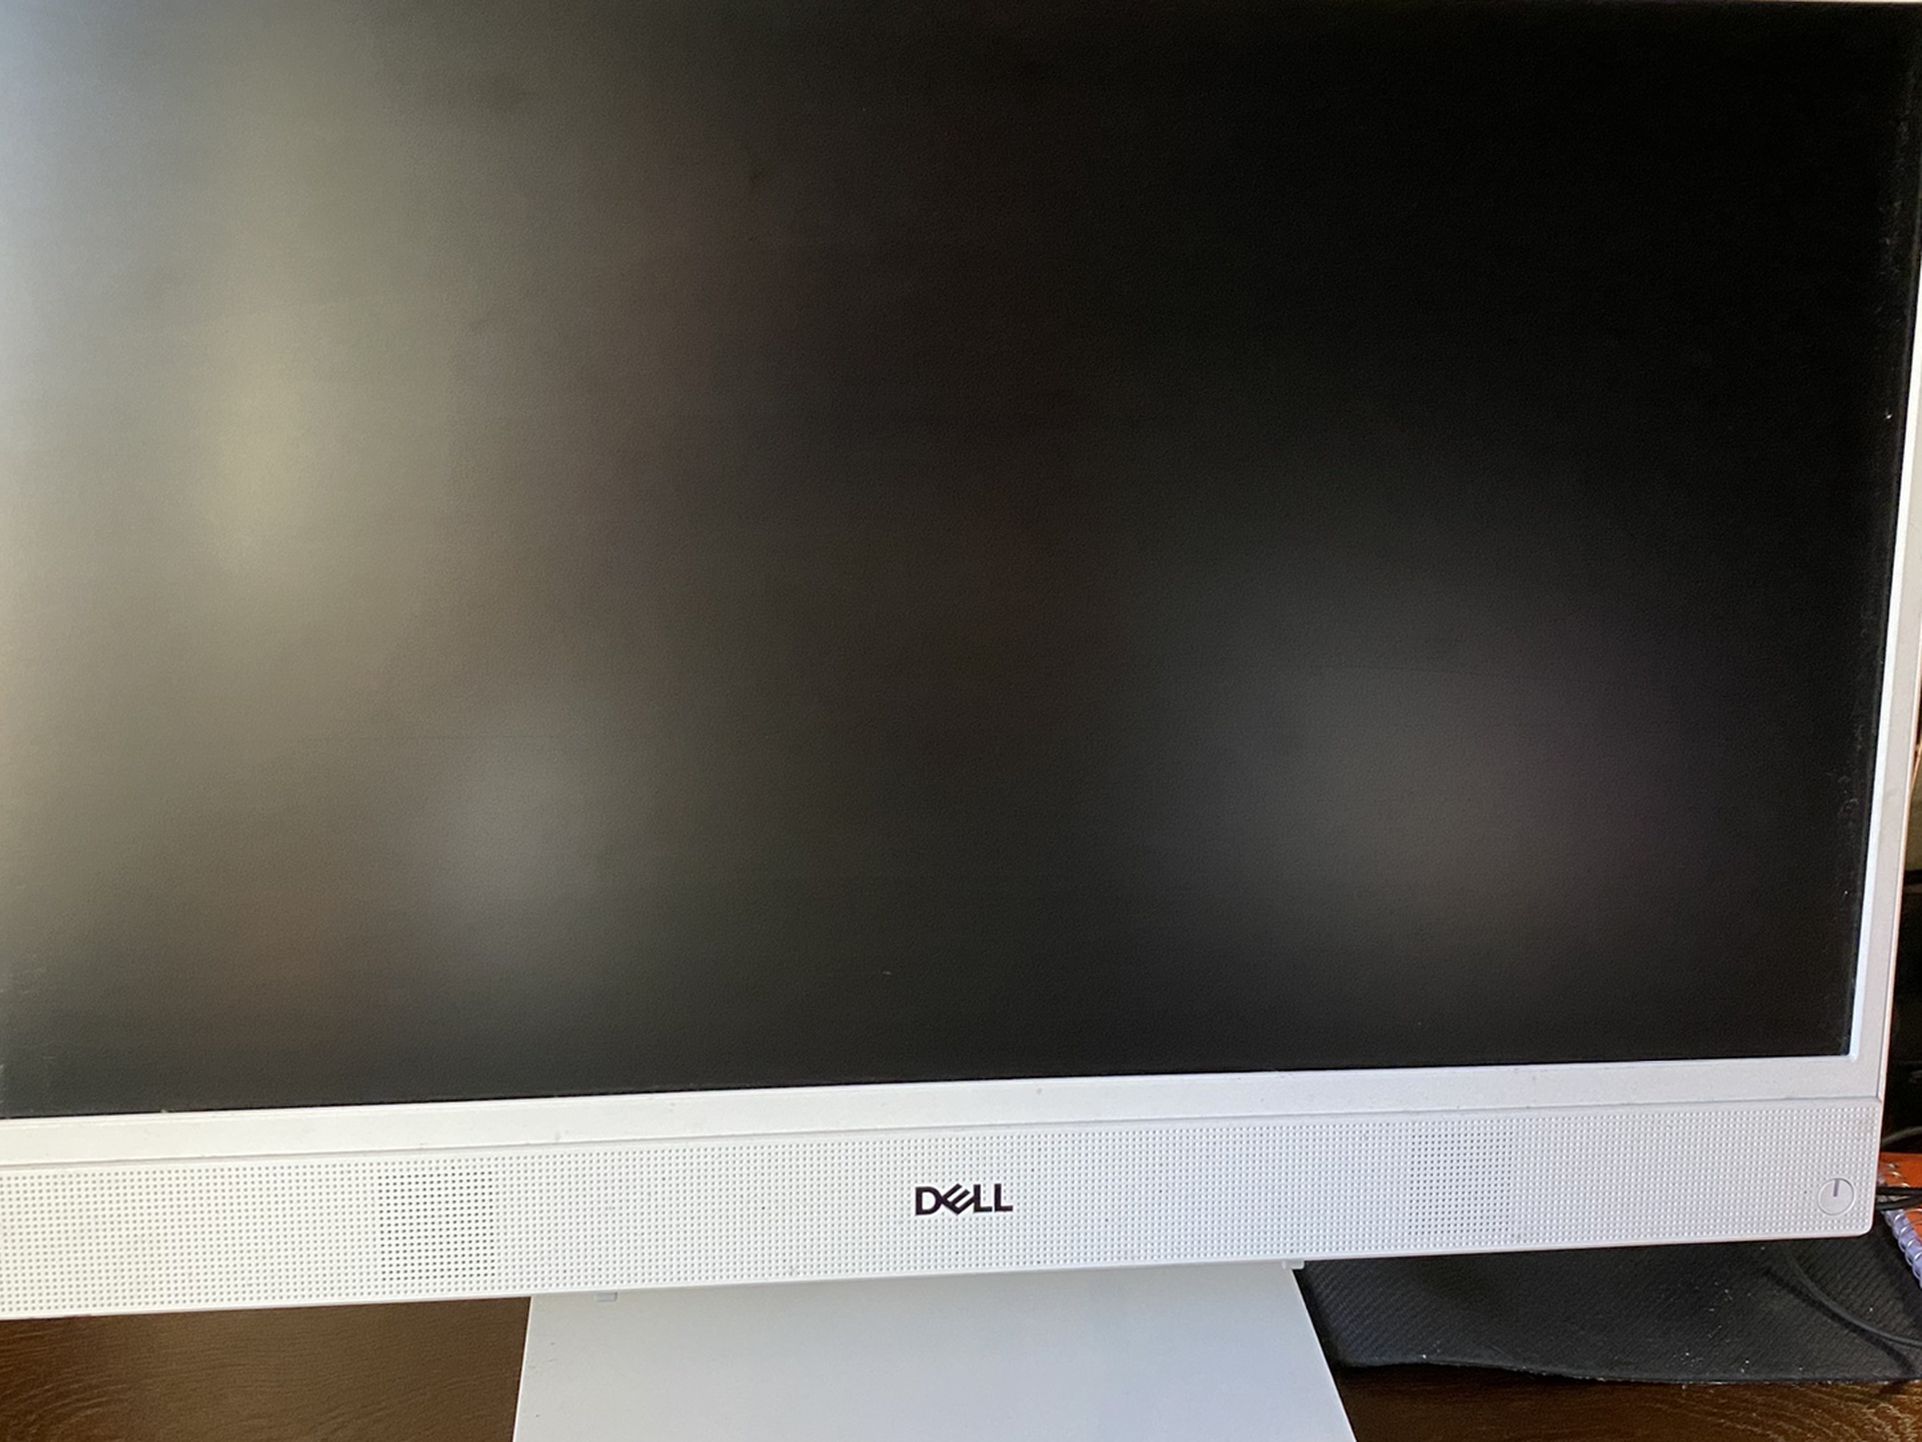 Dell Inspiron 22 3277 All In One PC